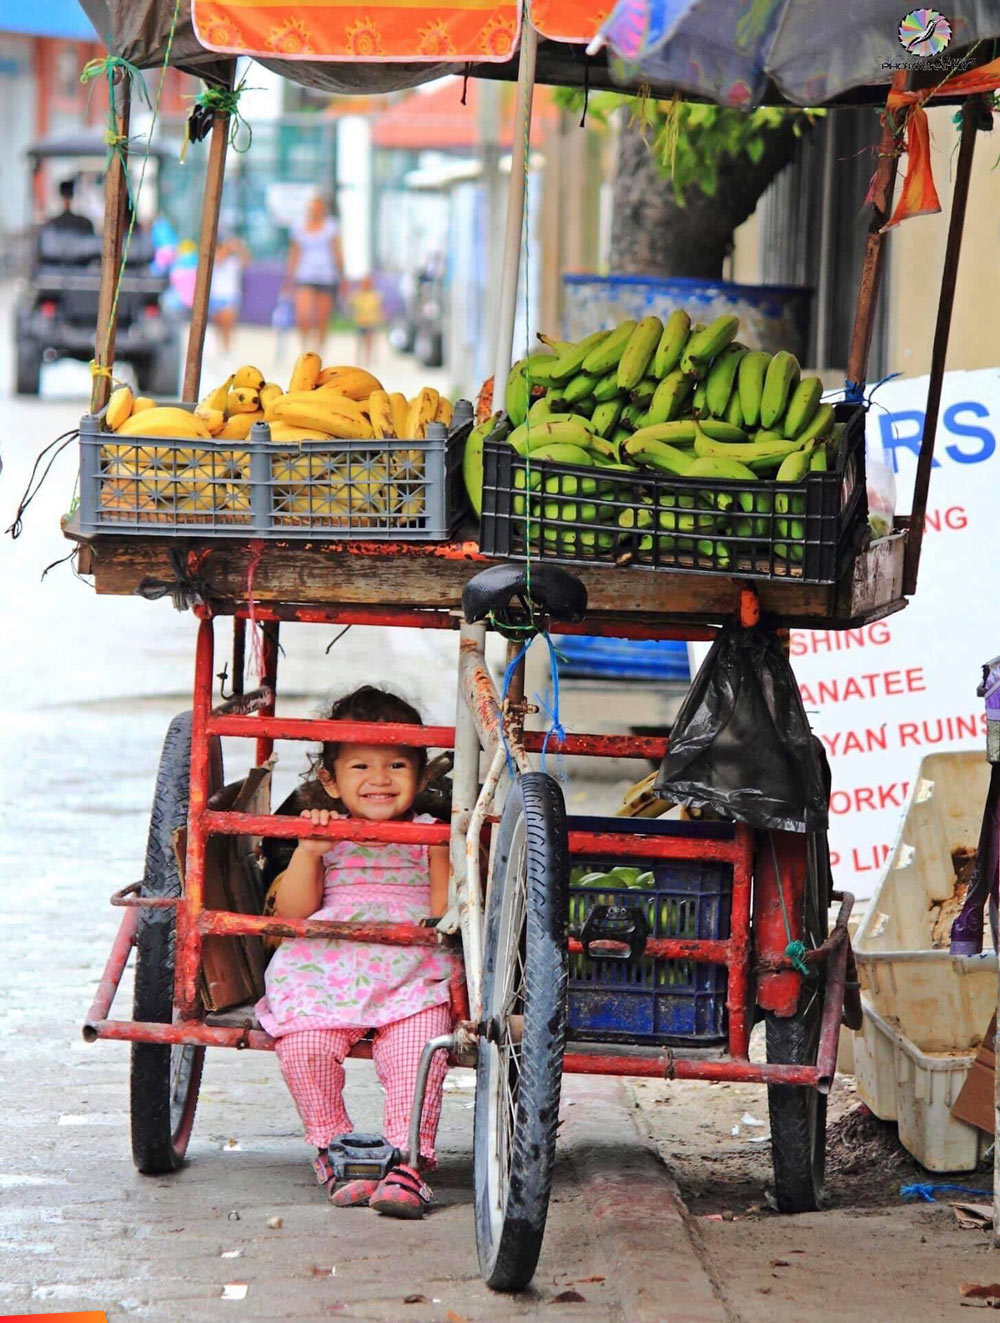 Little girl on the bottom of a fruit vendors cart in San Pedro, super cute